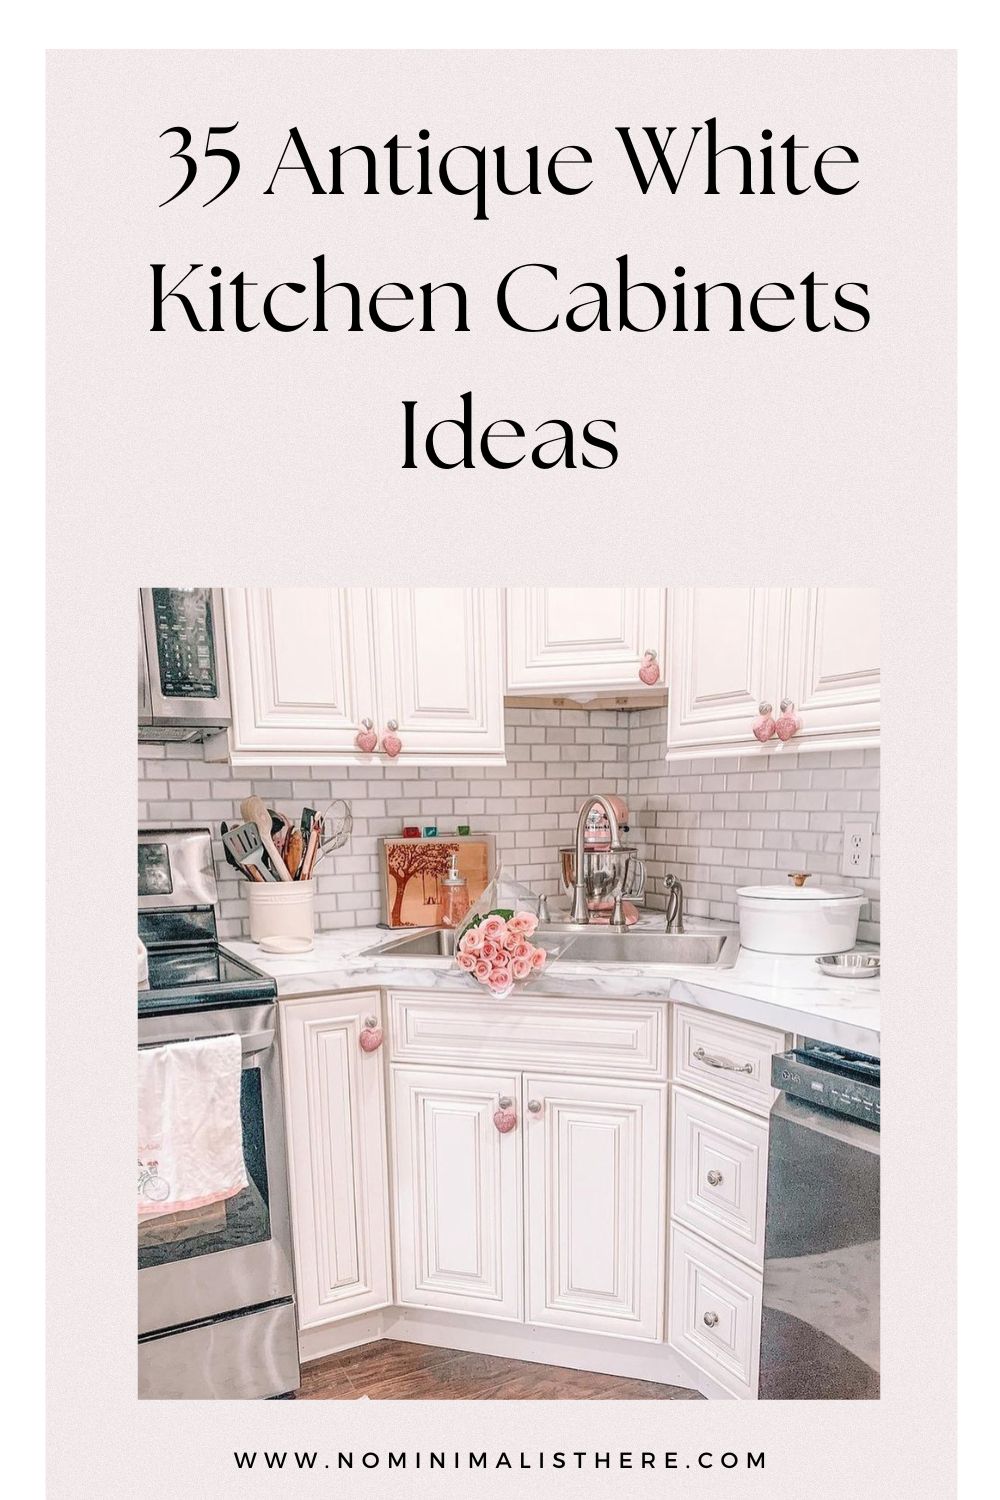 pinterest image for an article about antique white kitchen cabinets